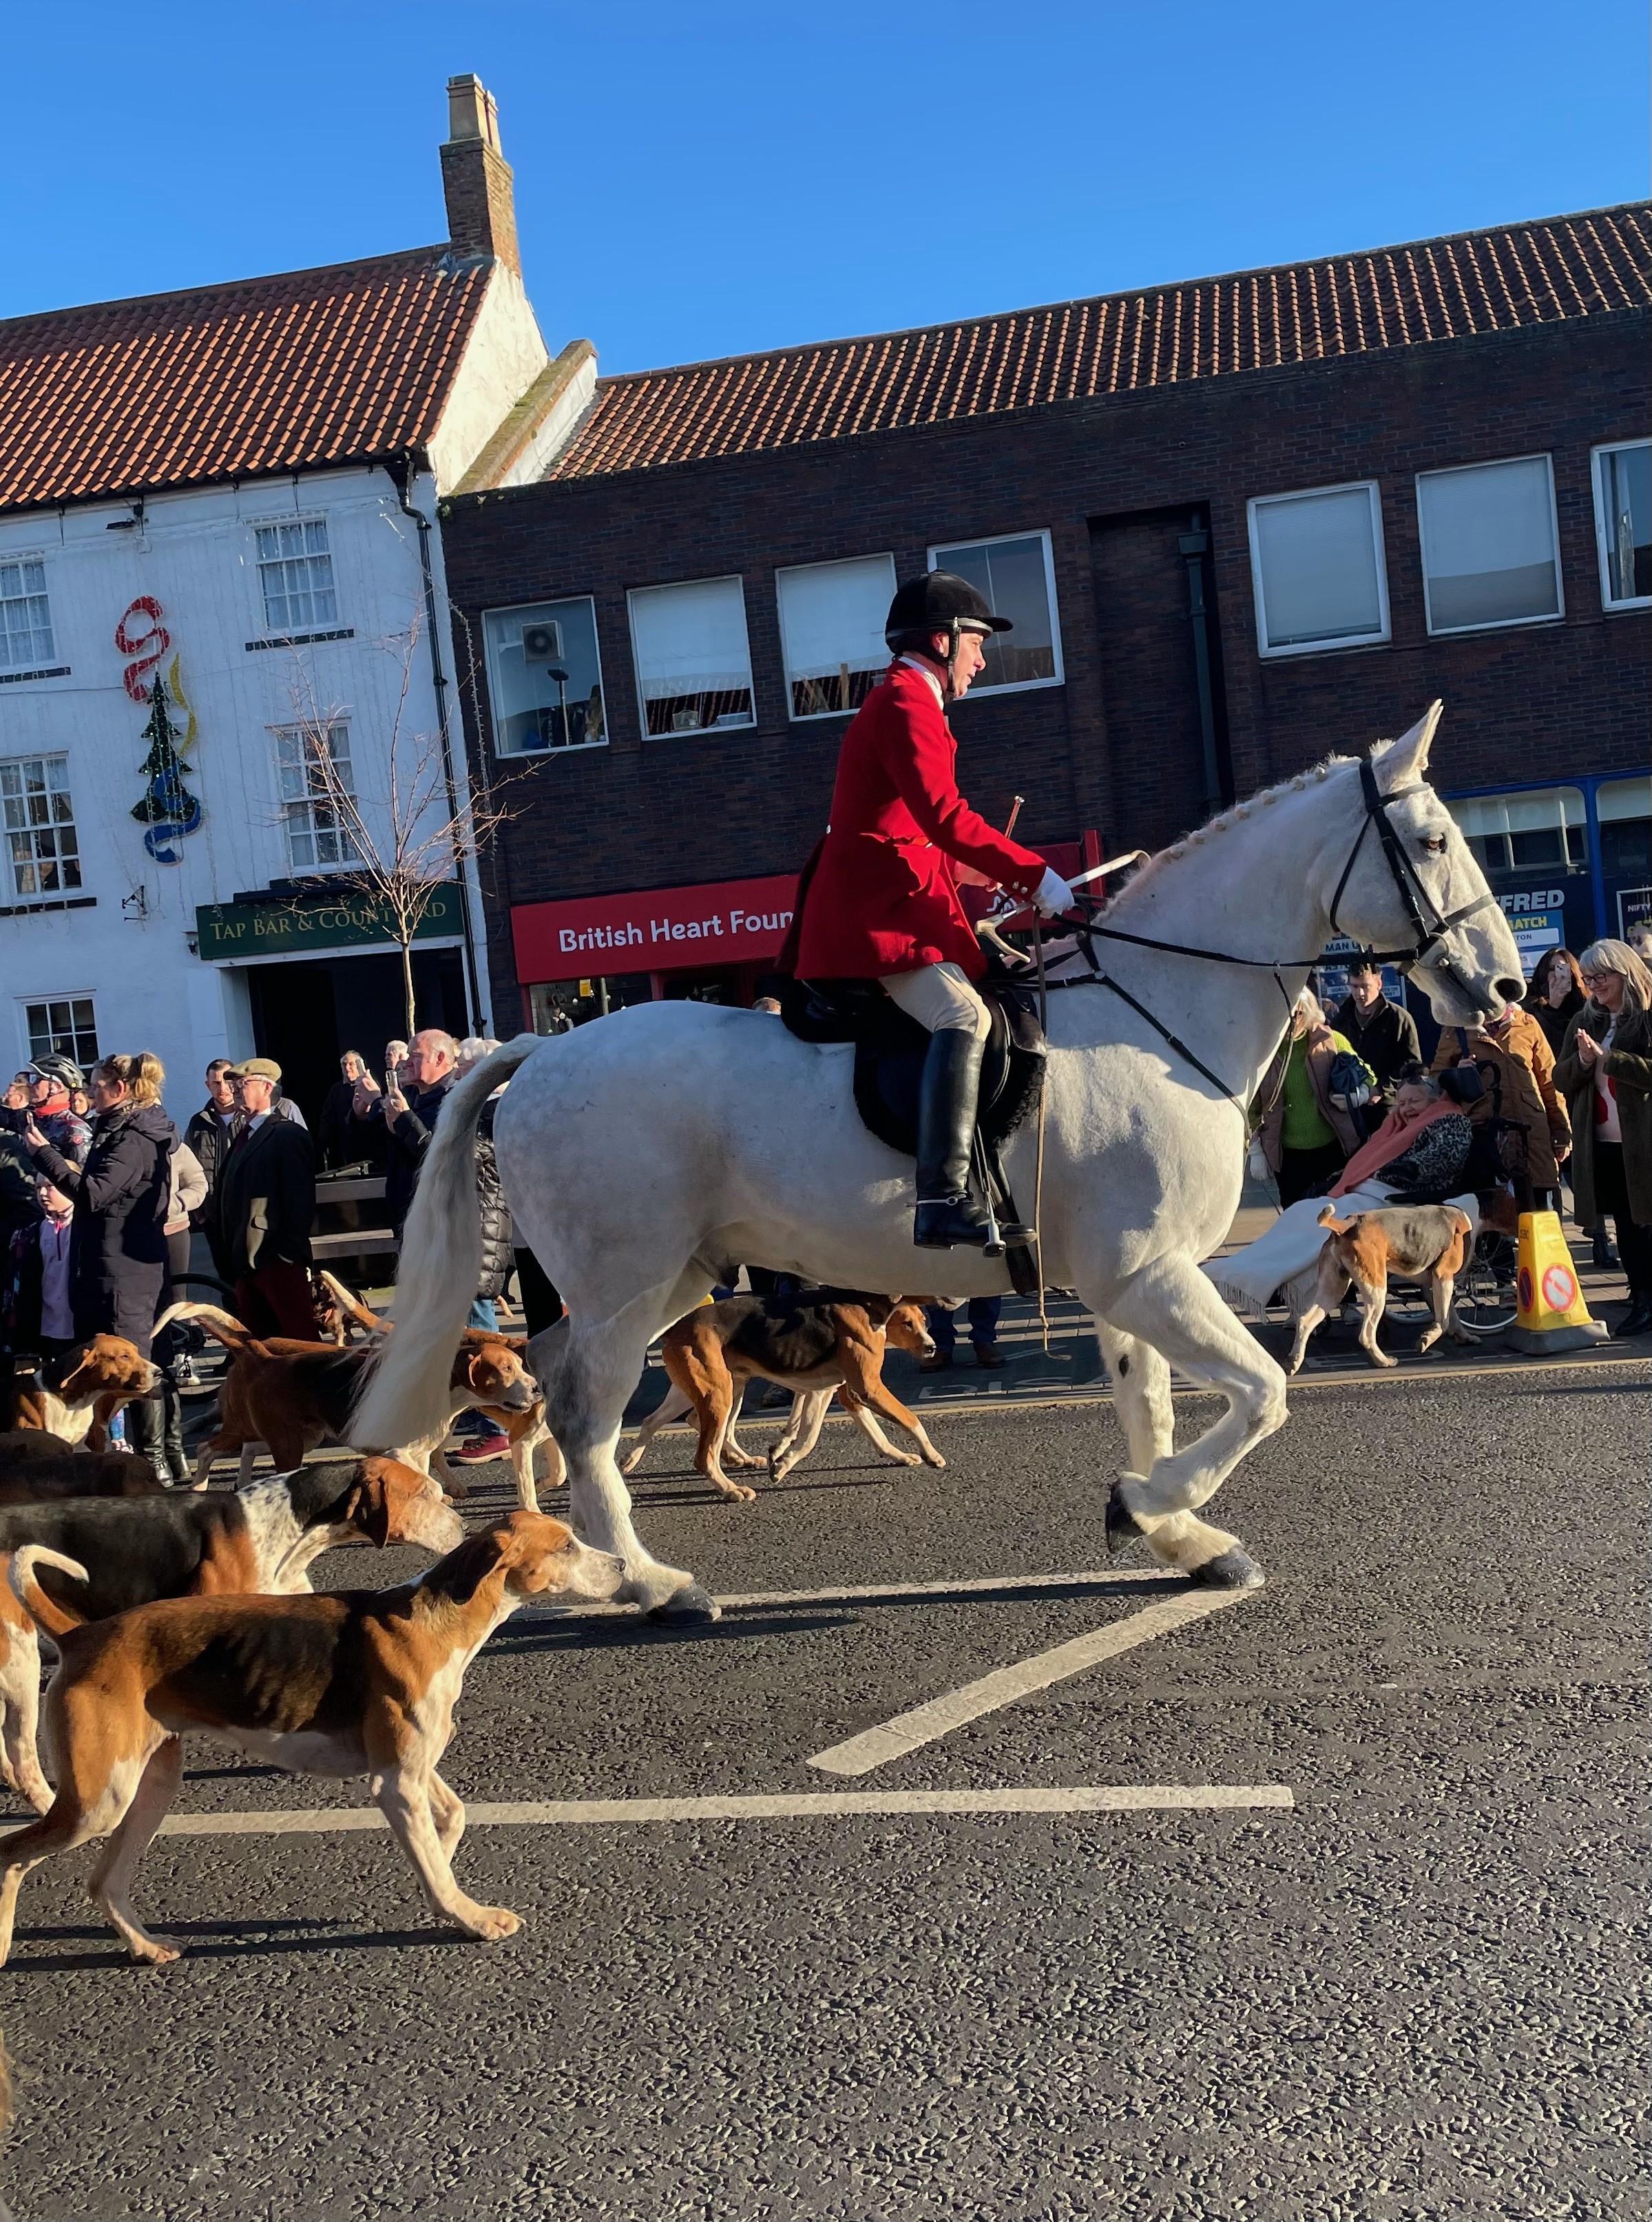 The Boxing Day hunt meet in Northallerton, by Tara Morris